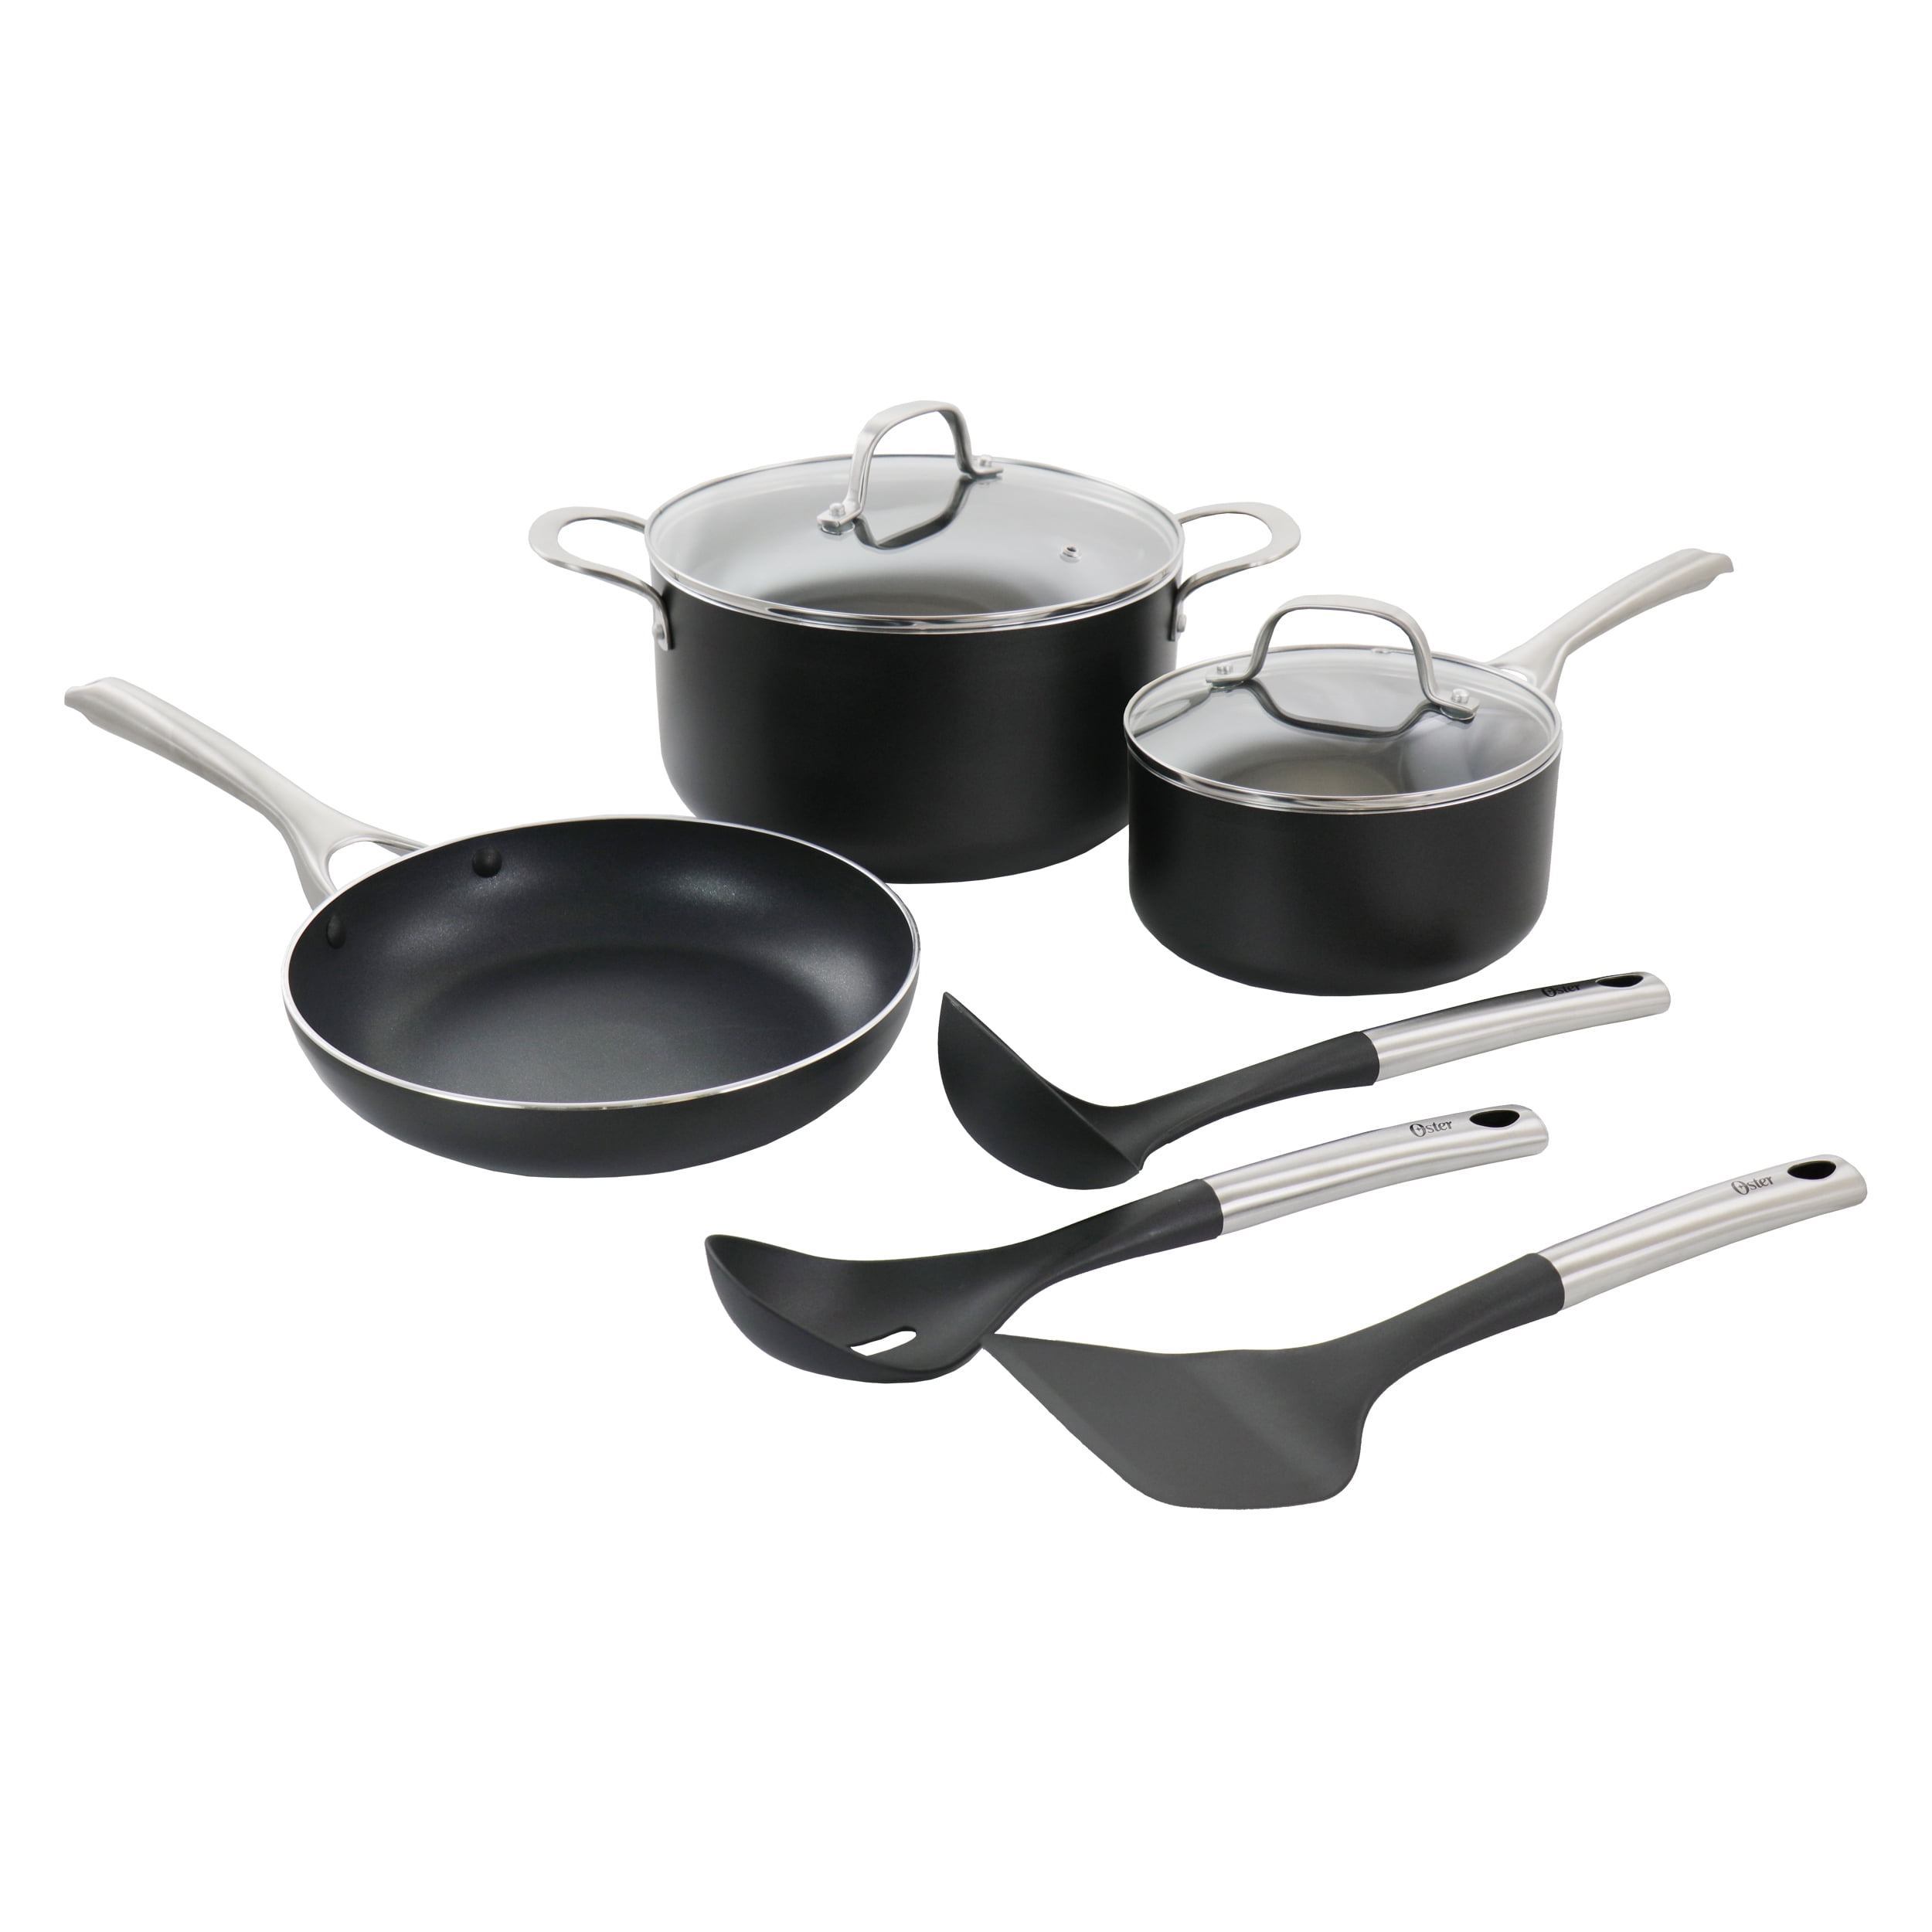 8-Piece Stainless Steel Assorted Cookware set with Glass Lids